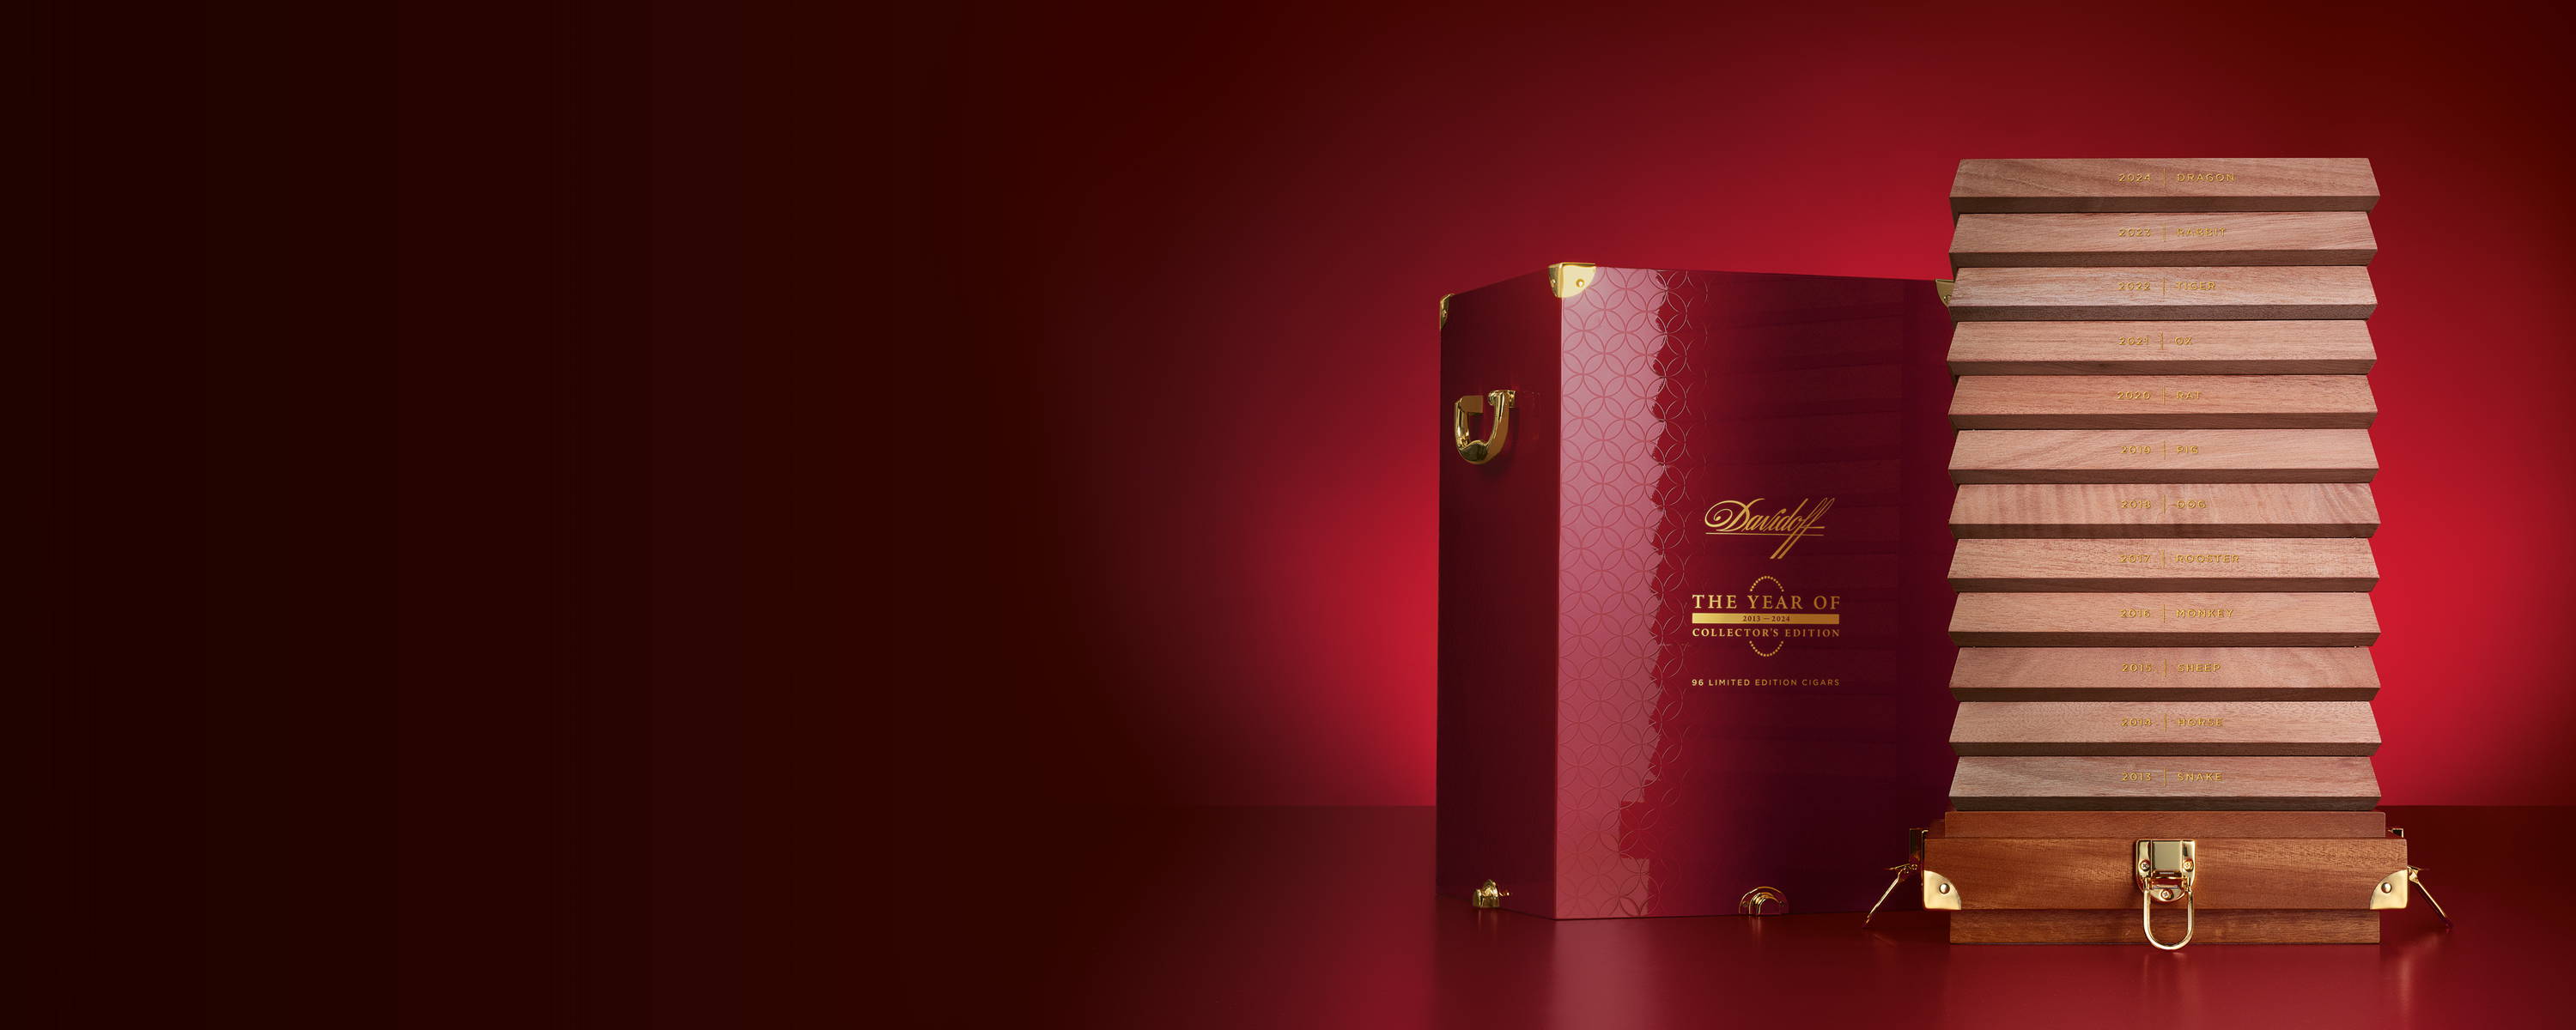 Davidoff The Year of Collector's Edition Zigarren